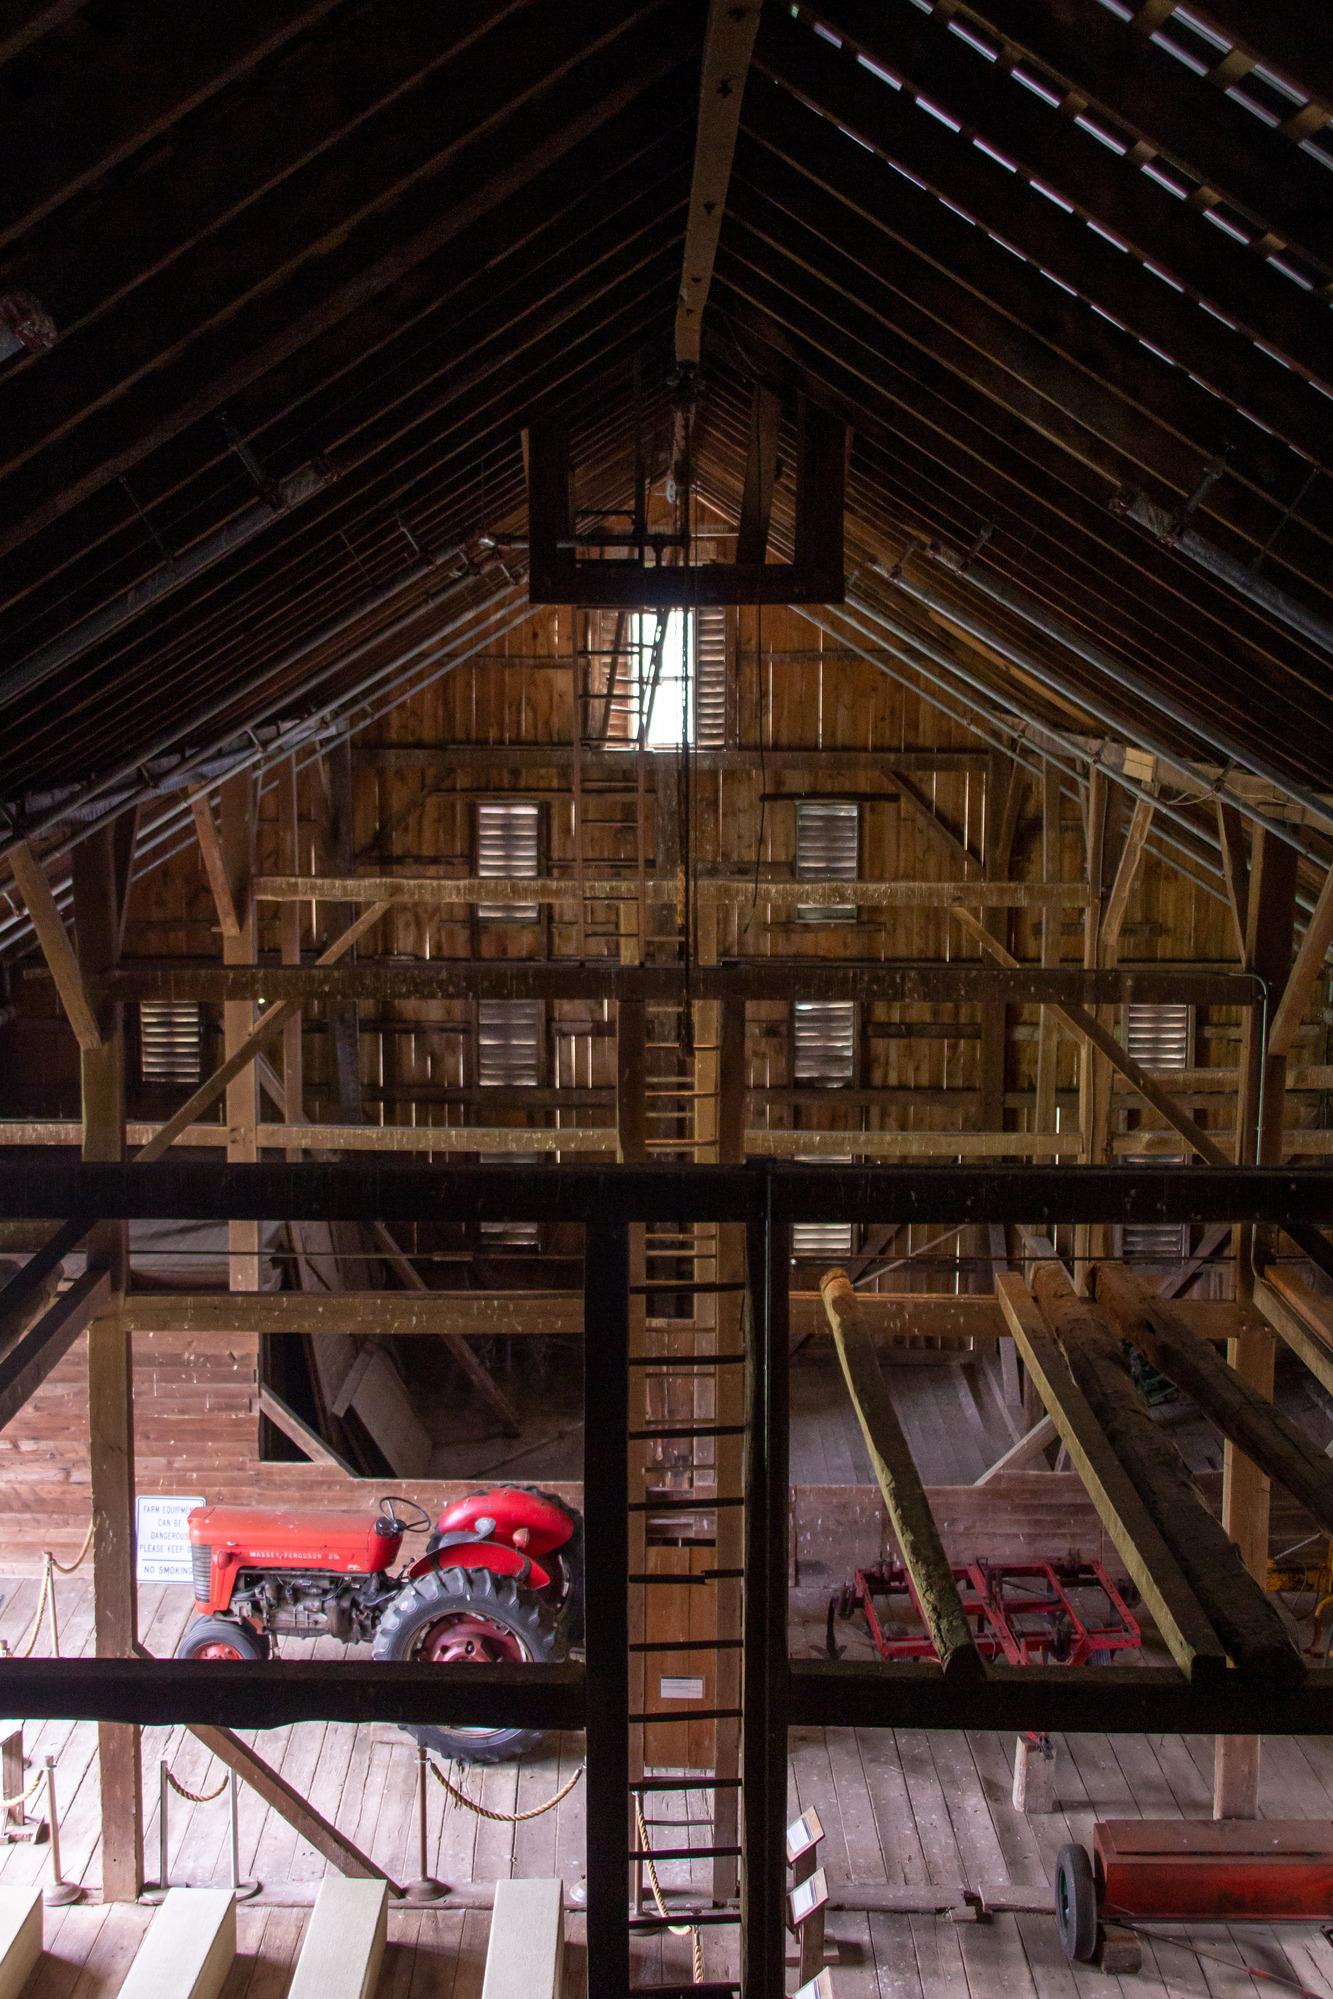 A birds eye view of a barn with farm equipment in it.